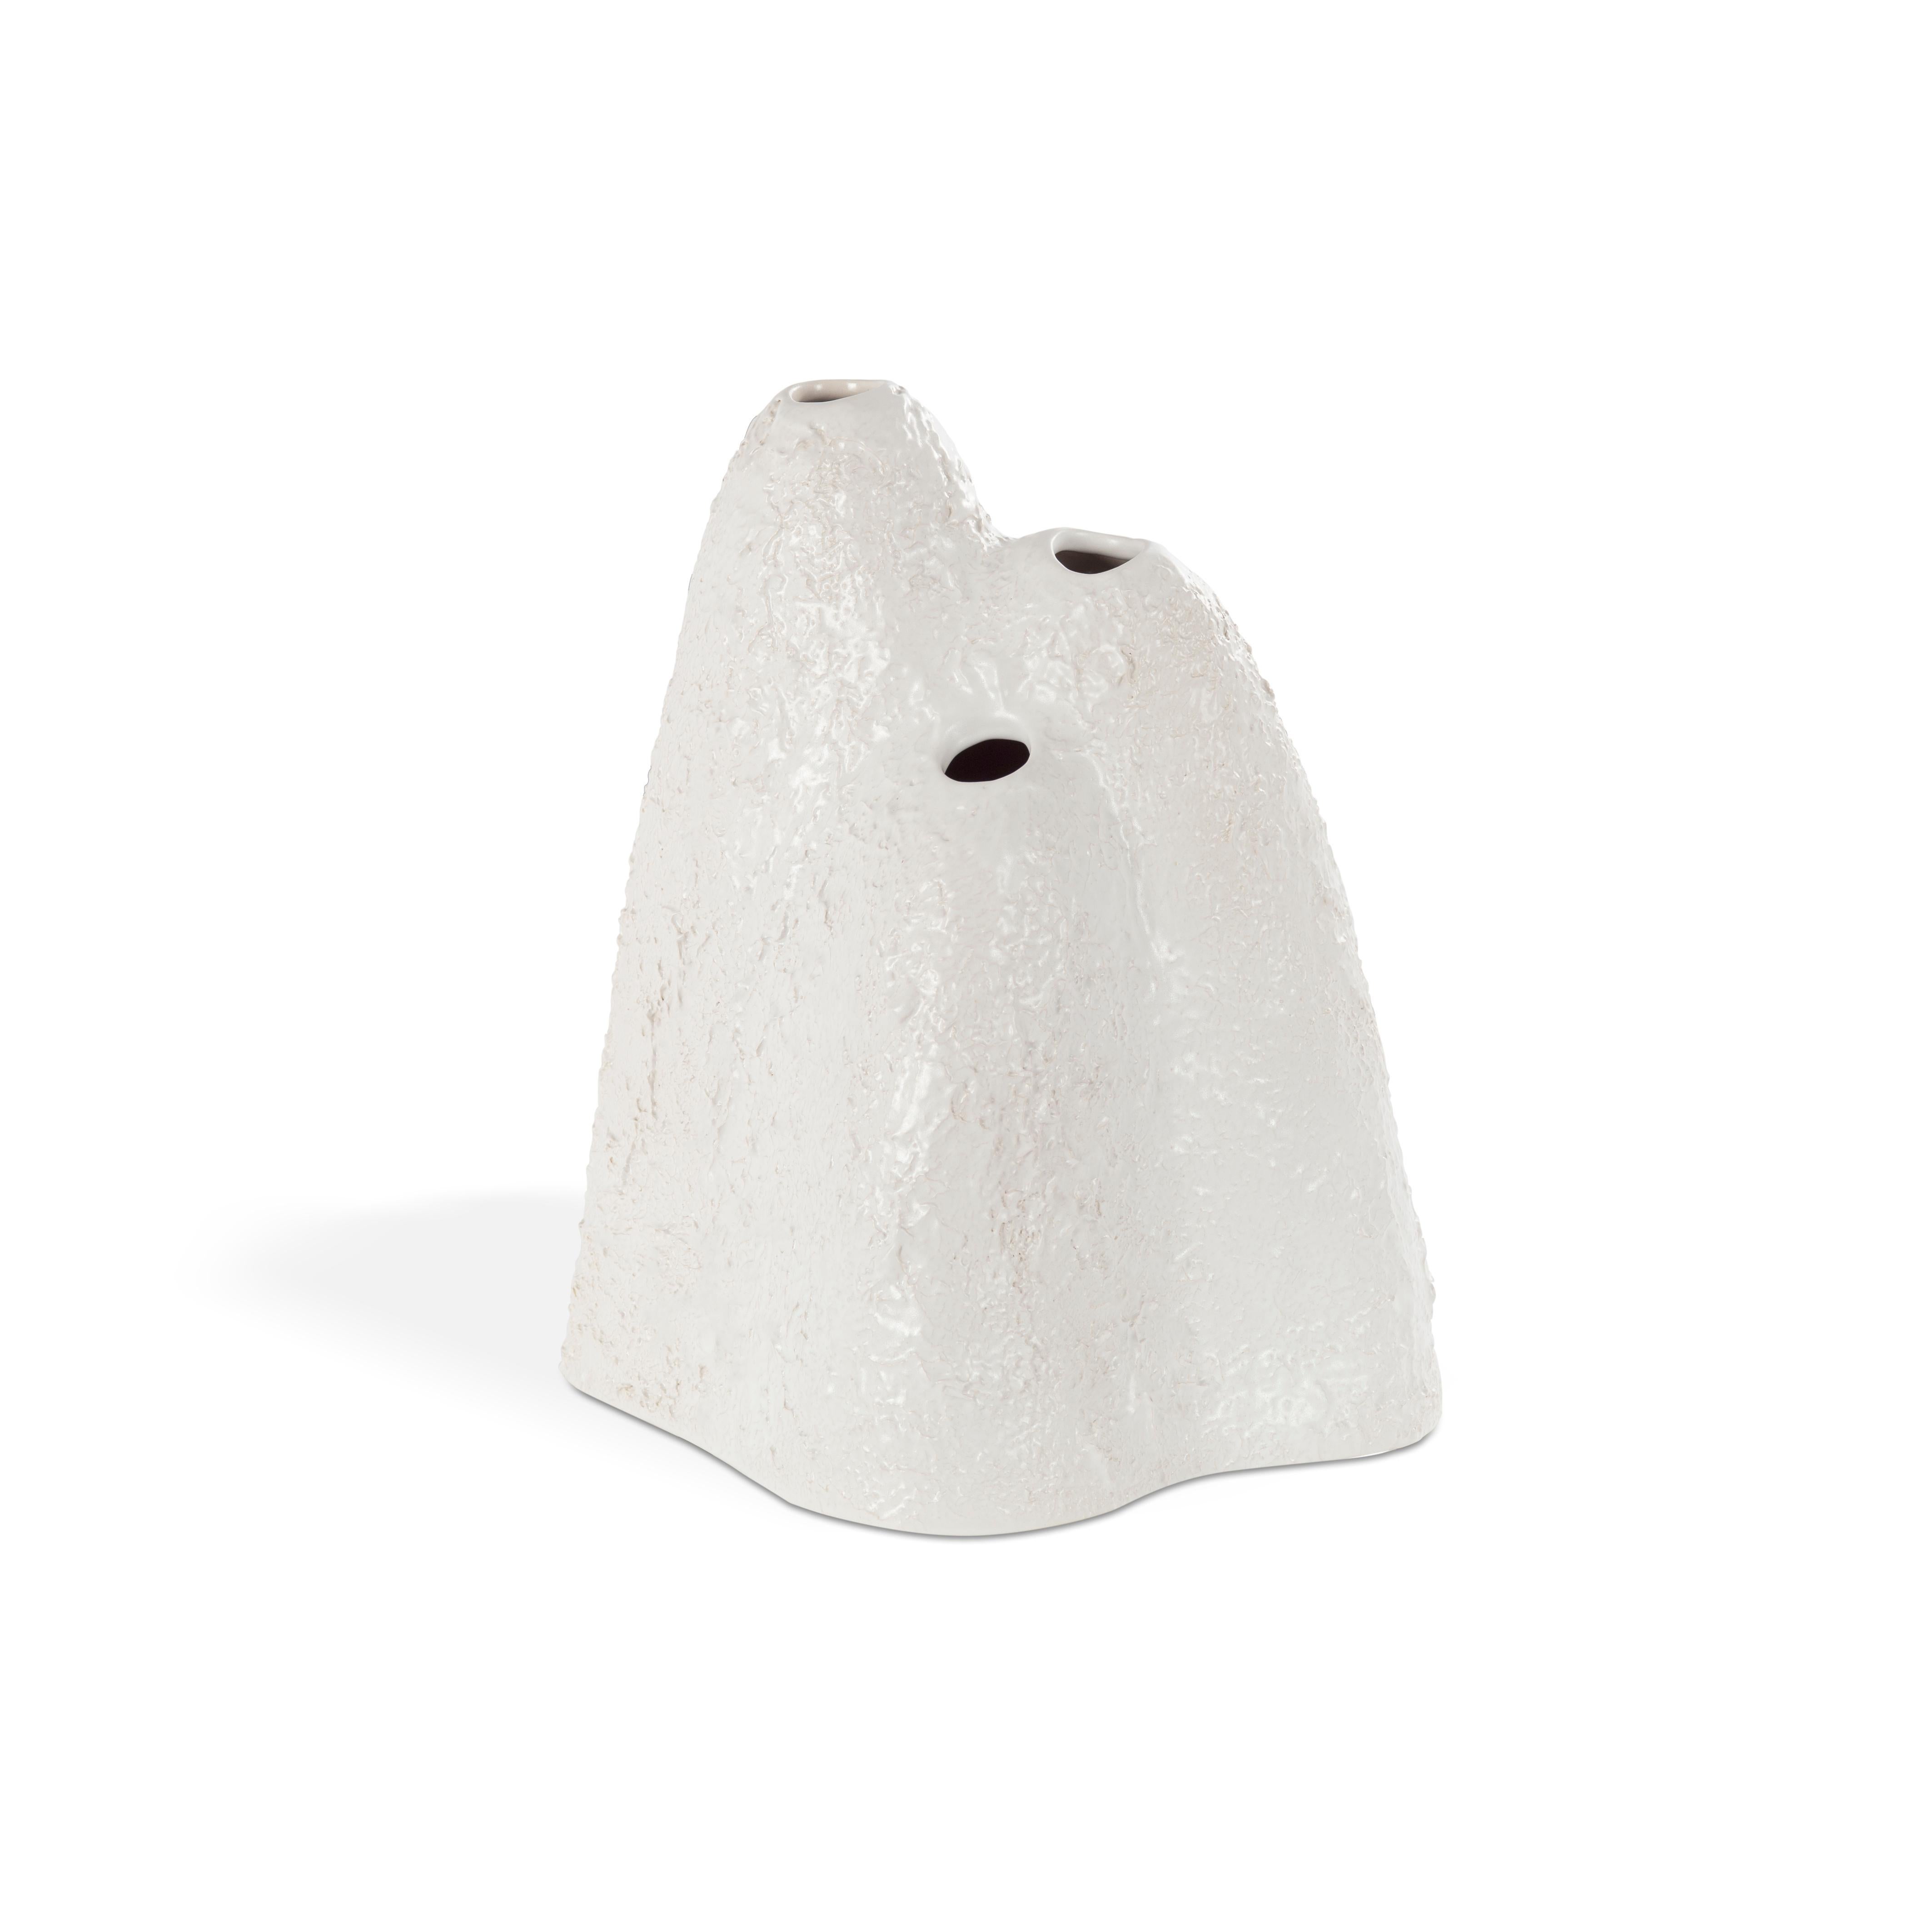 Mountain big white vase by Pulpo.
Dimensions: D25 x W20 x H31 cm.
Materials: ceramic

Also available in different colours. 

Making a dramatic entrance overtop your tablescape below comes the mountain vase. Its solid ceramic form presents the